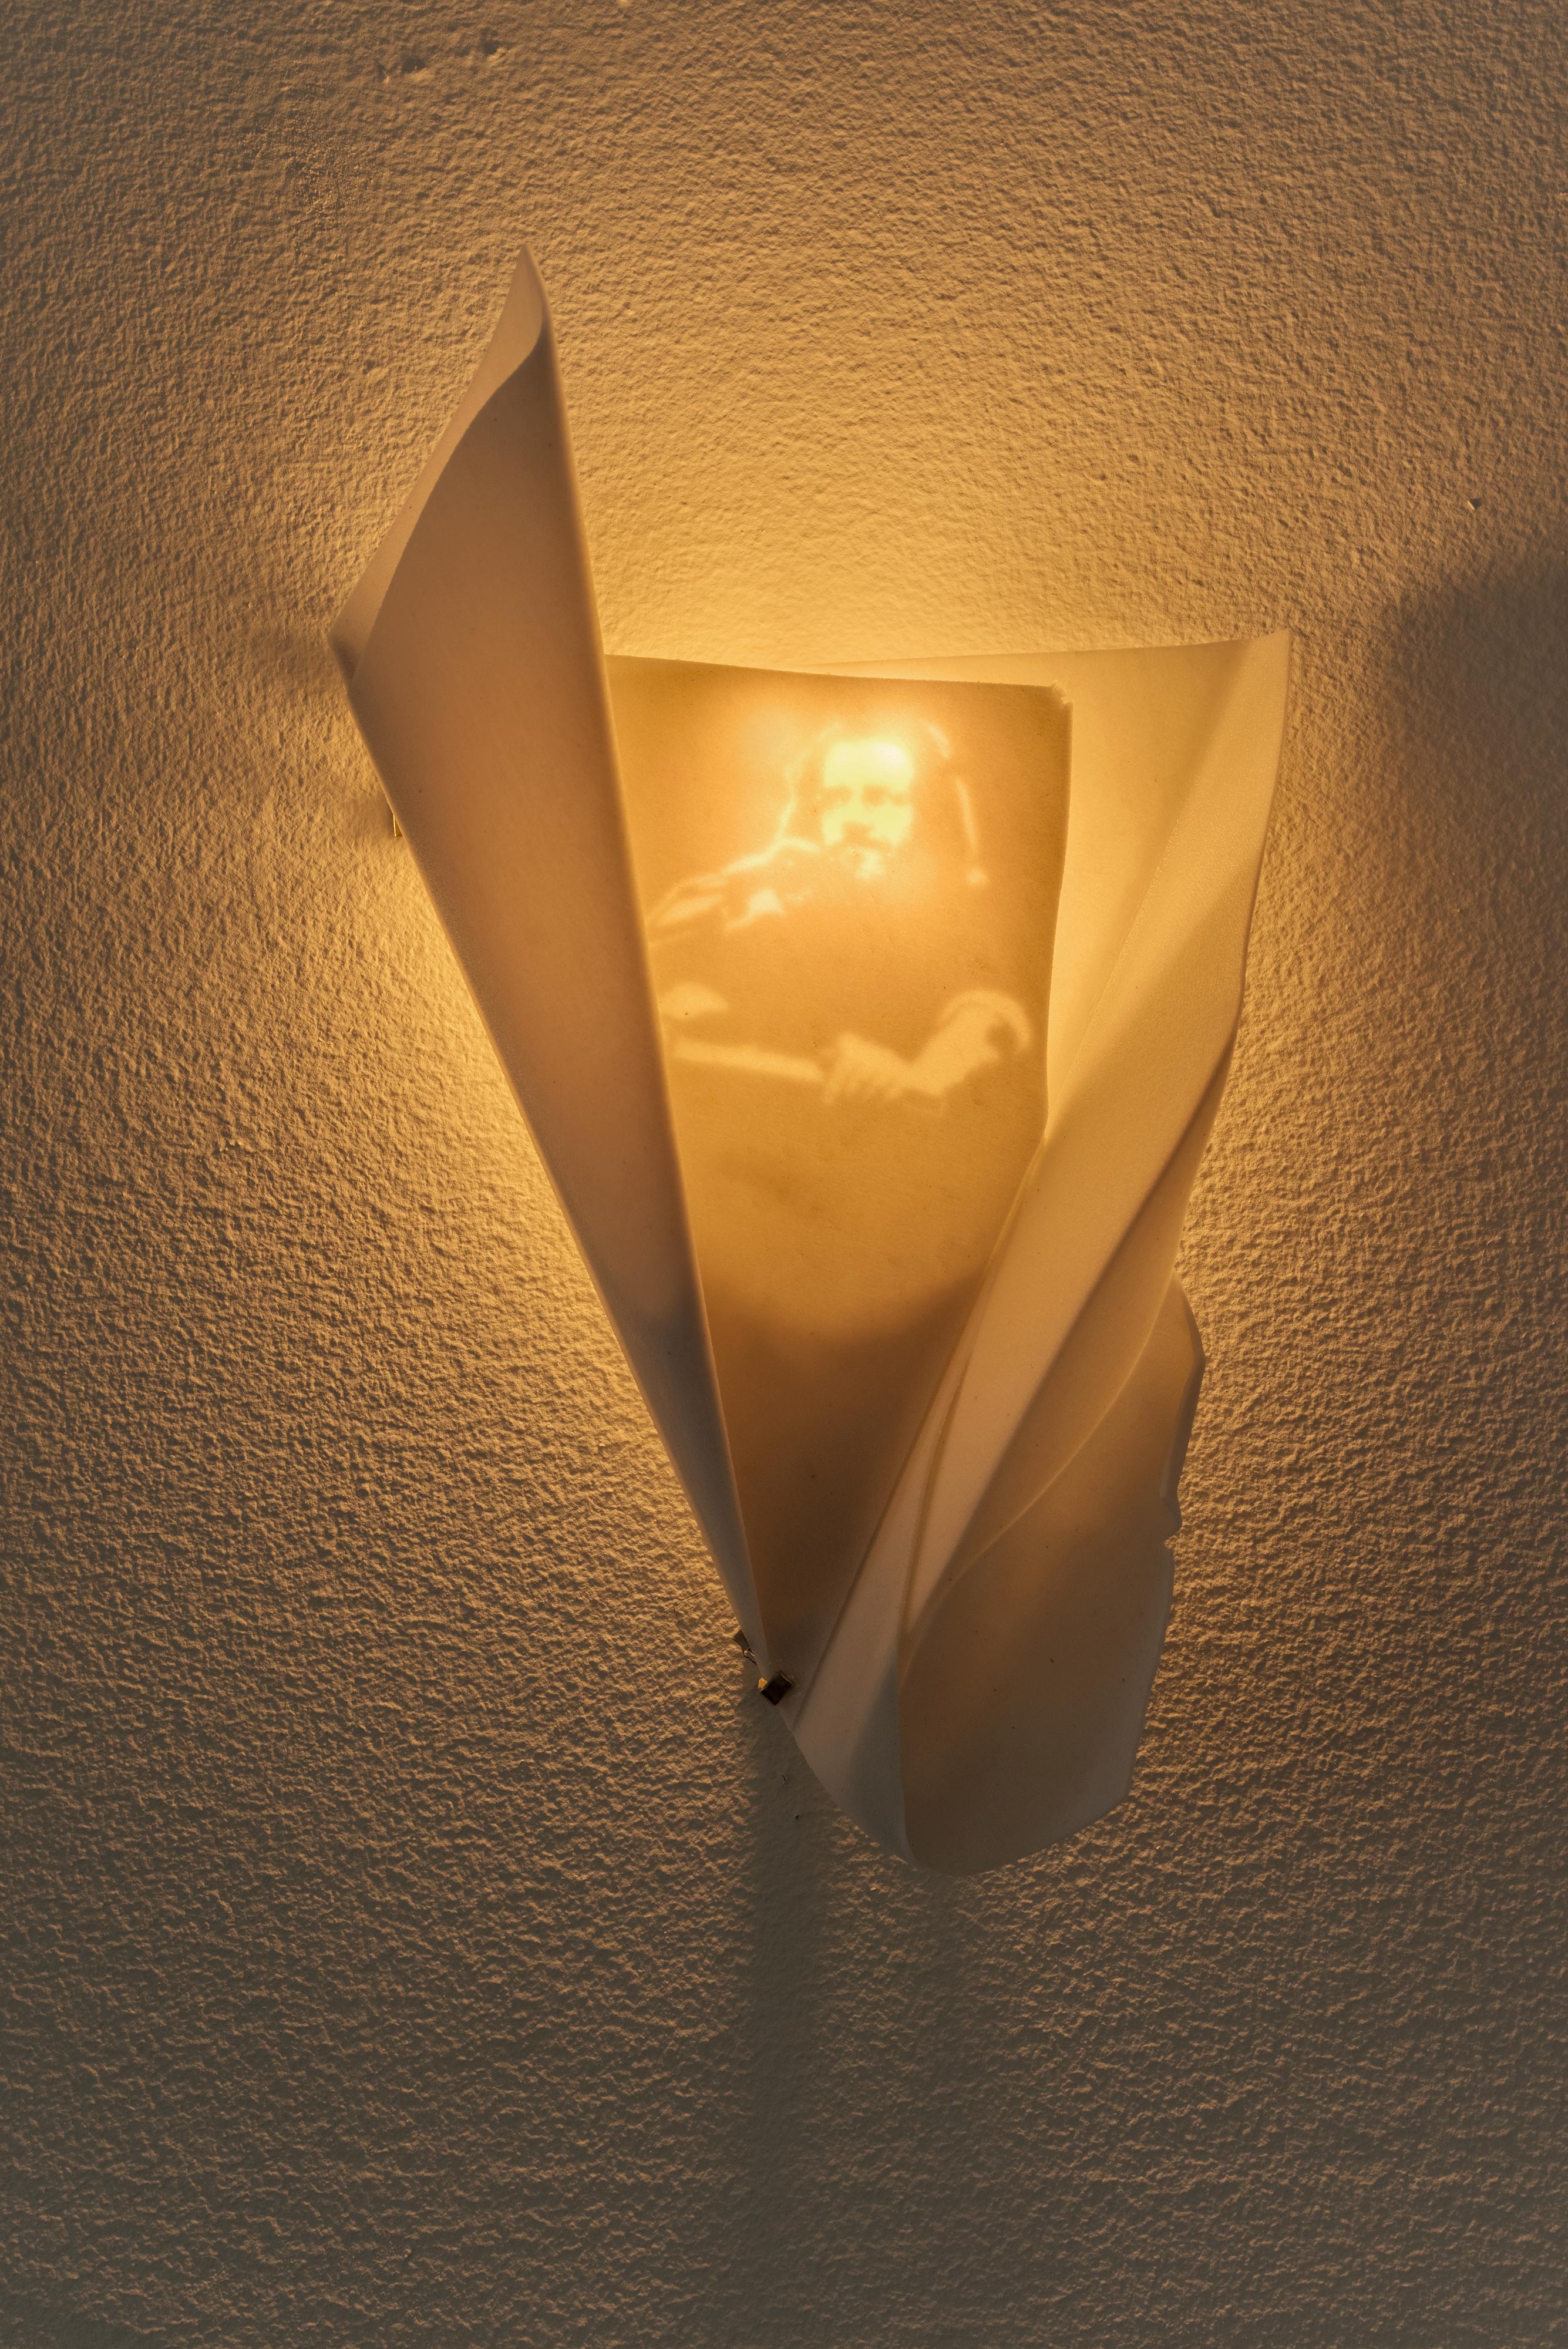 Sconce (This is Water)<br>2016<br>Sandstone, lighting hardware<br>4.938 x 8.028 in (12.5 x 20.4 cm)